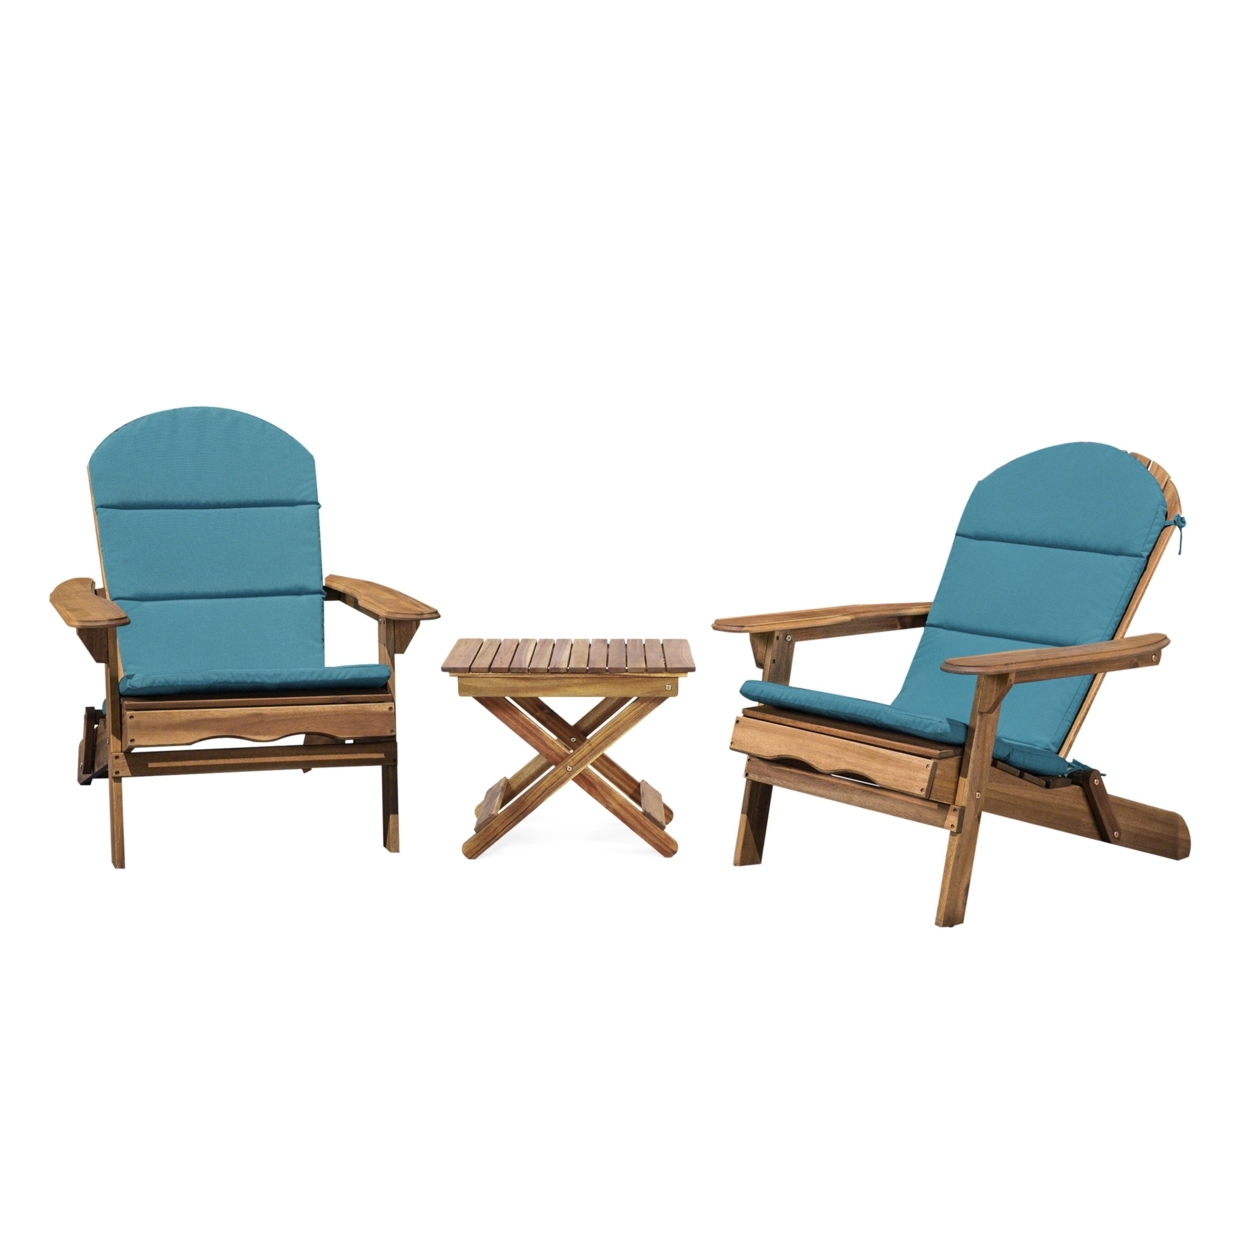 Reed Outdoor 2 Seater Acacia Wood Chat Set With Water Resistant Cushions - White/navy Blue